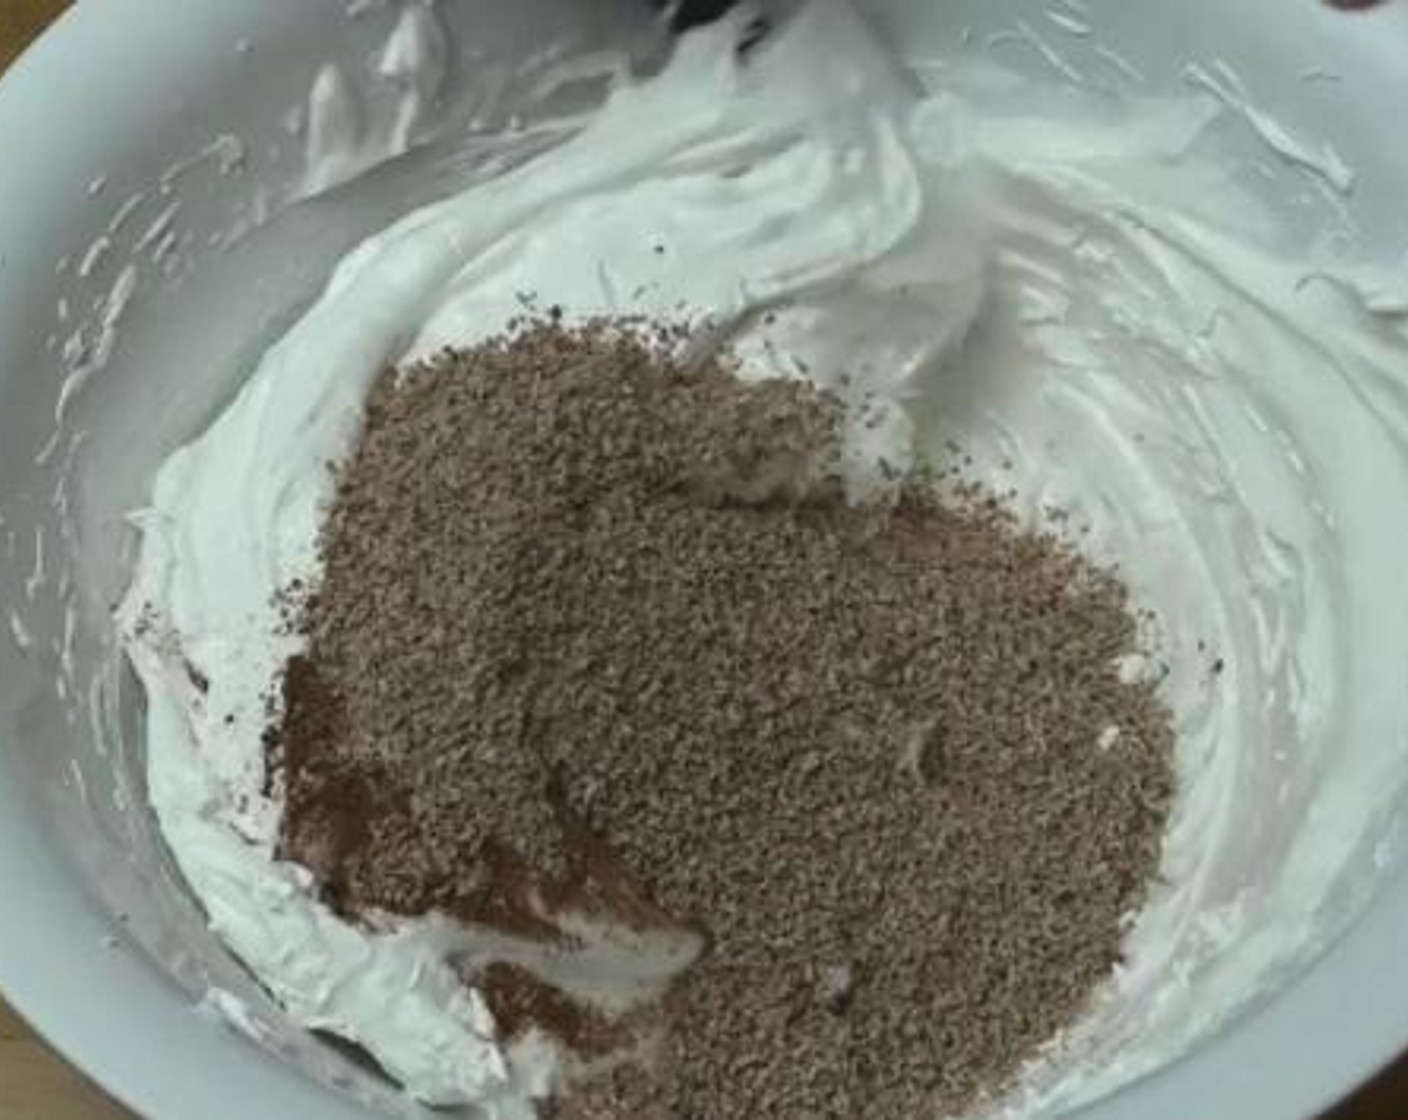 step 2 Add in the Vanilla Extract (1/2 Tbsp), Corn Flour (1/2 Tbsp), Distilled White Vinegar (1 tsp), Unsweetened Cocoa Powder (1/4 cup), and Milk Chocolate (1/3 cup), and combine everything together.